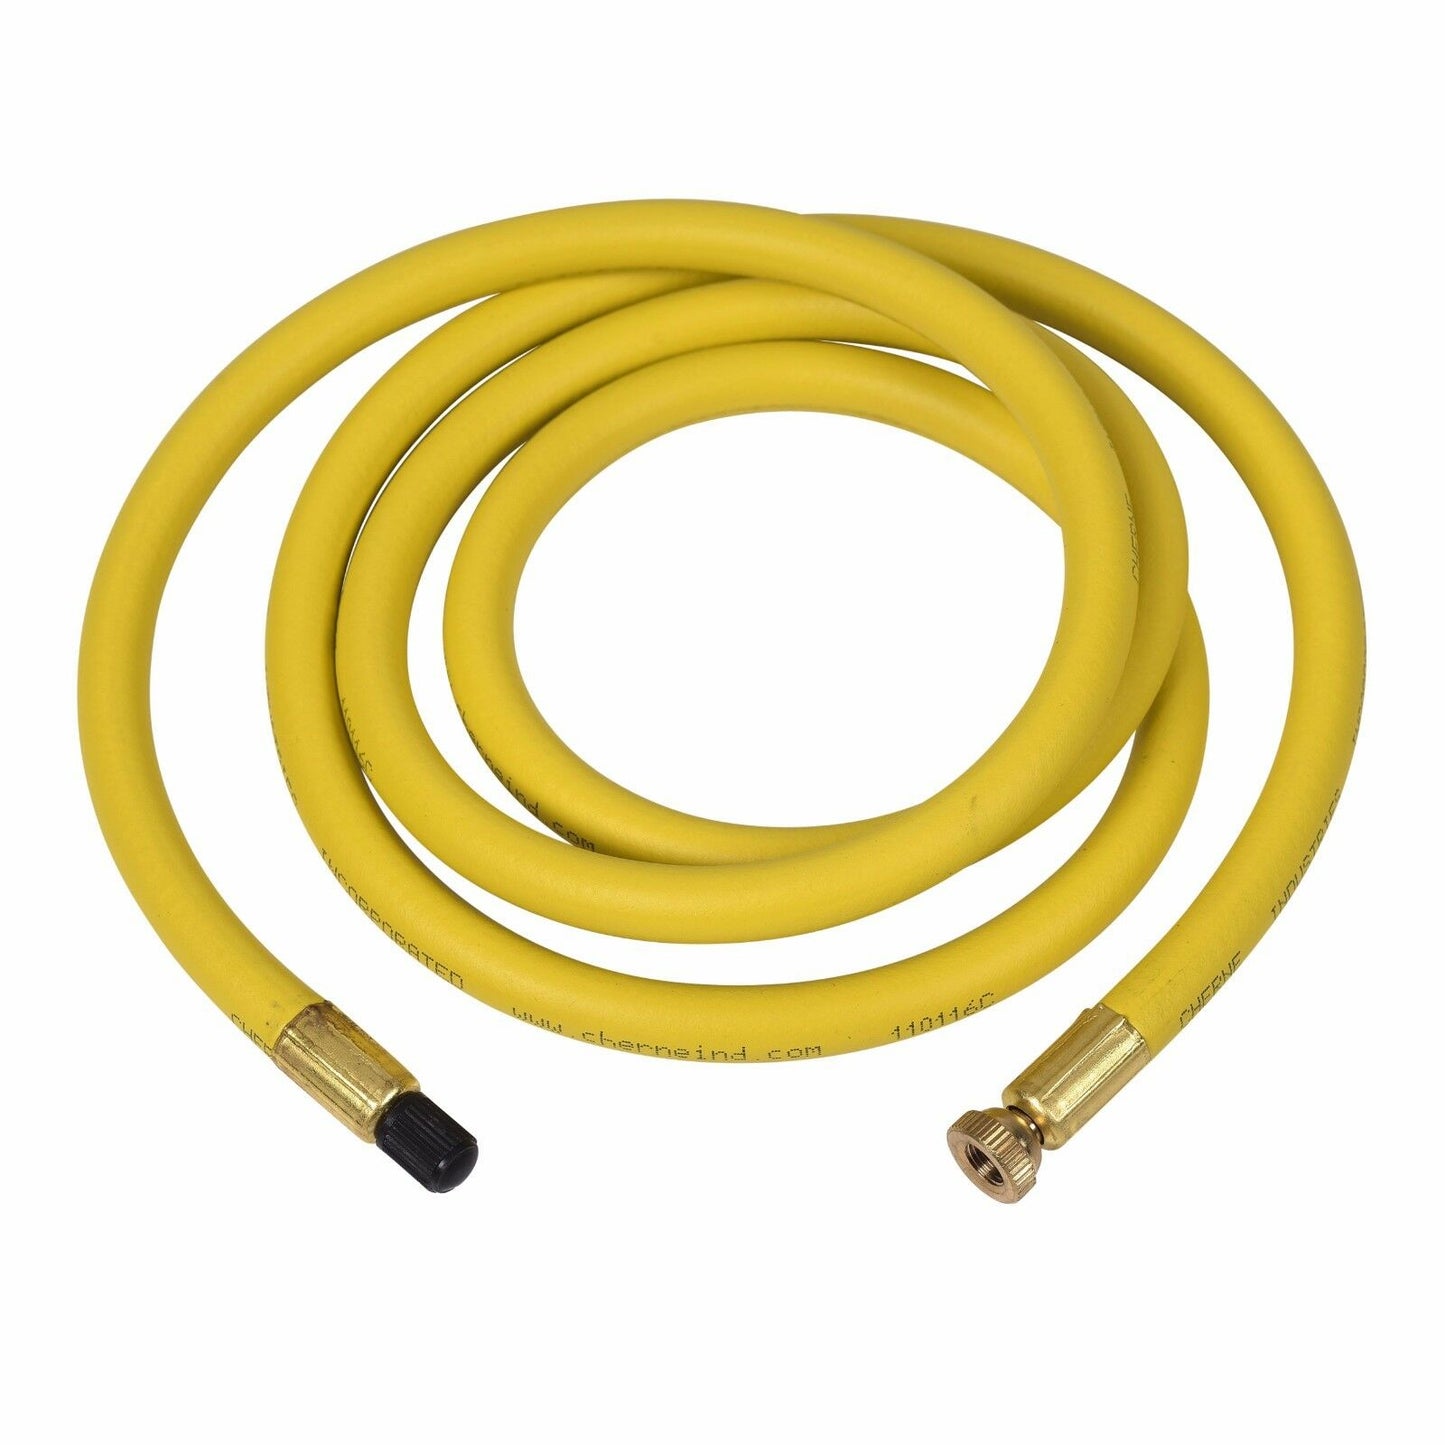 274100 - Cherne 10' Extension Inflation Hose - 3/16" ID